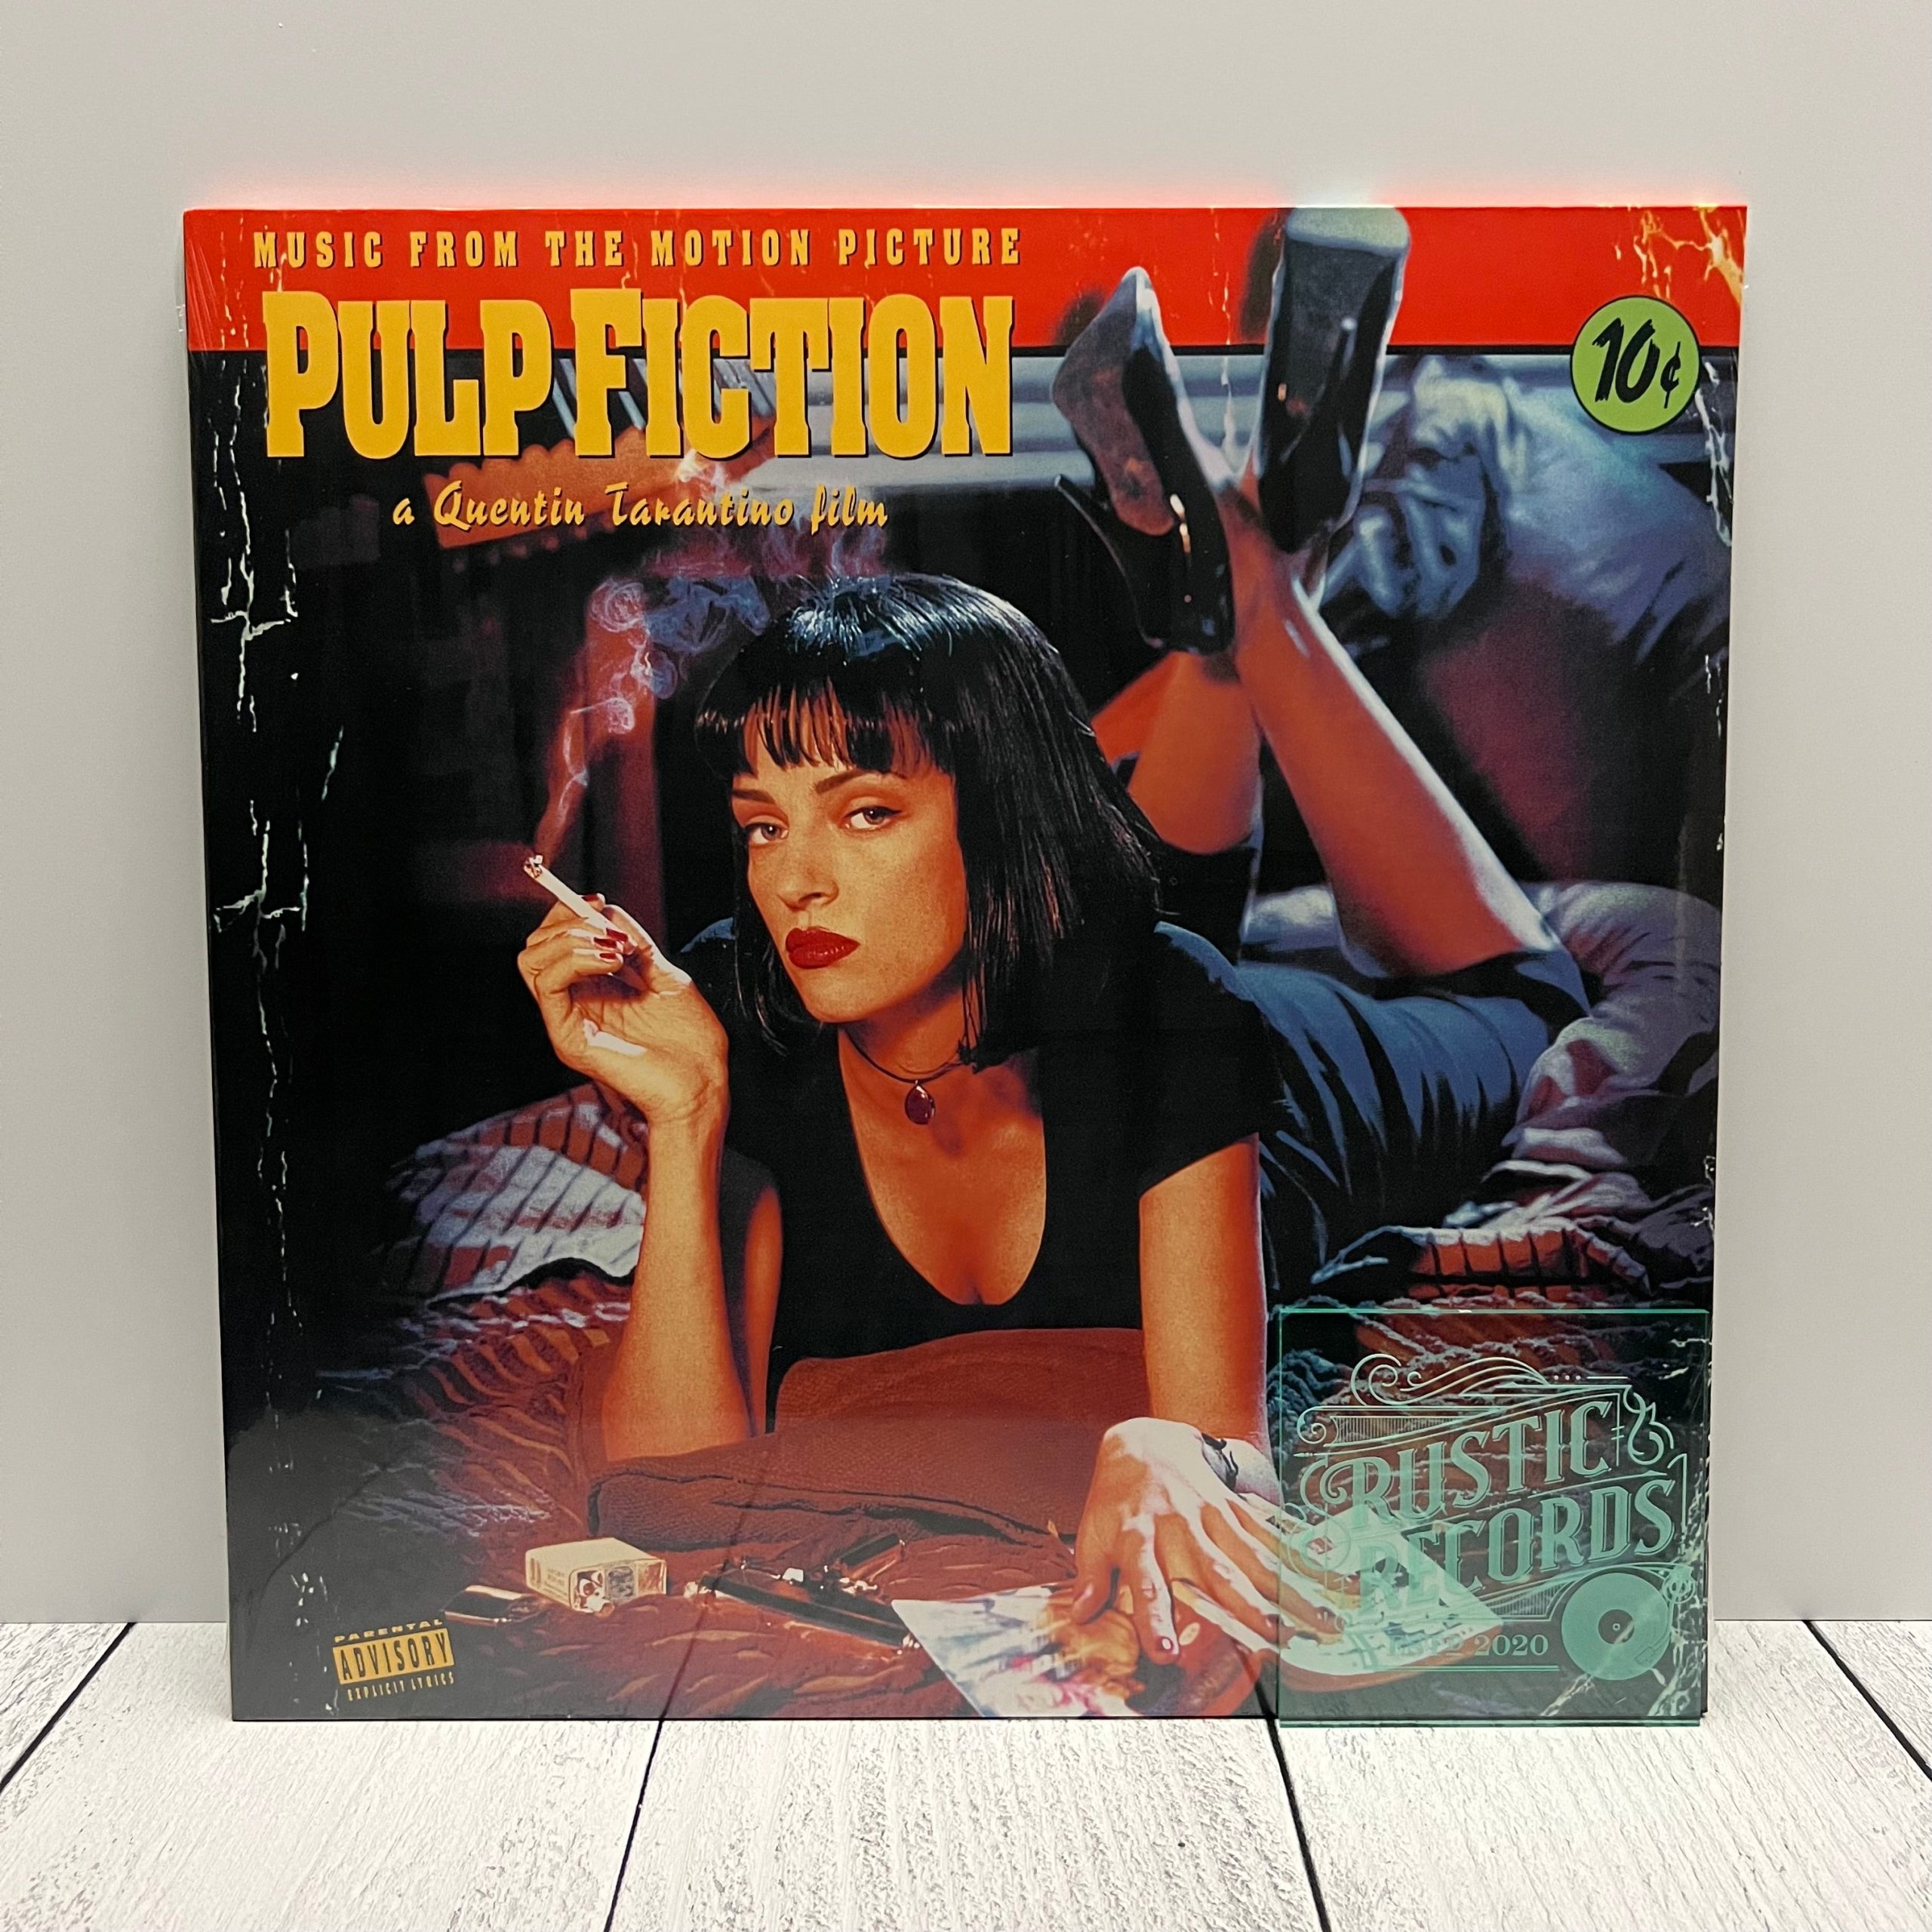 Rediscovering the Timeless Cool of the “Pulp Fiction” Soundtrack